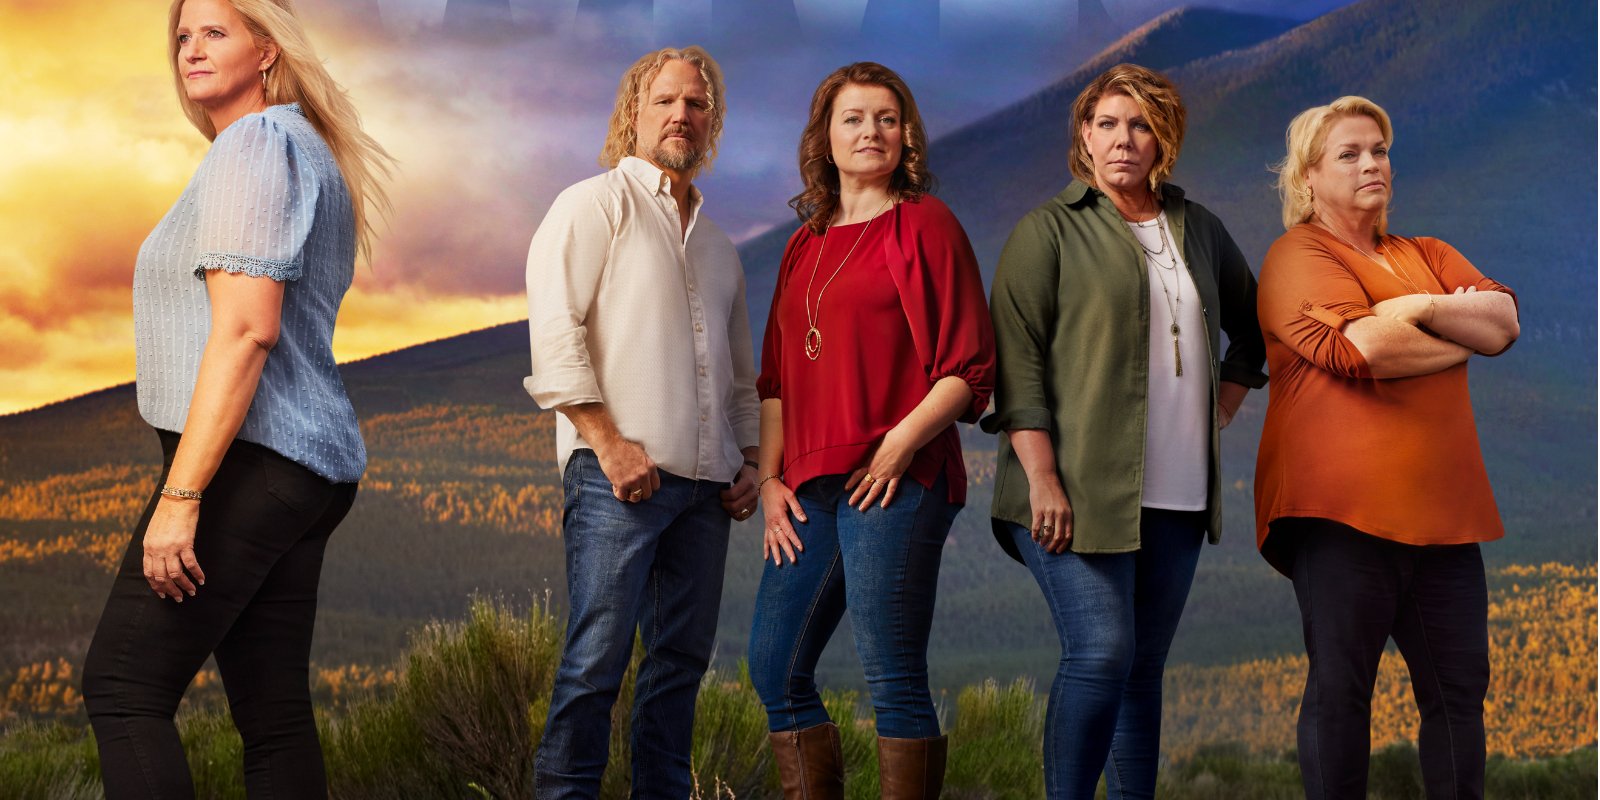 ‘Sister Wives’ Star, Kody Brown, Claims Christine Brown Used to Be ‘Compliant’